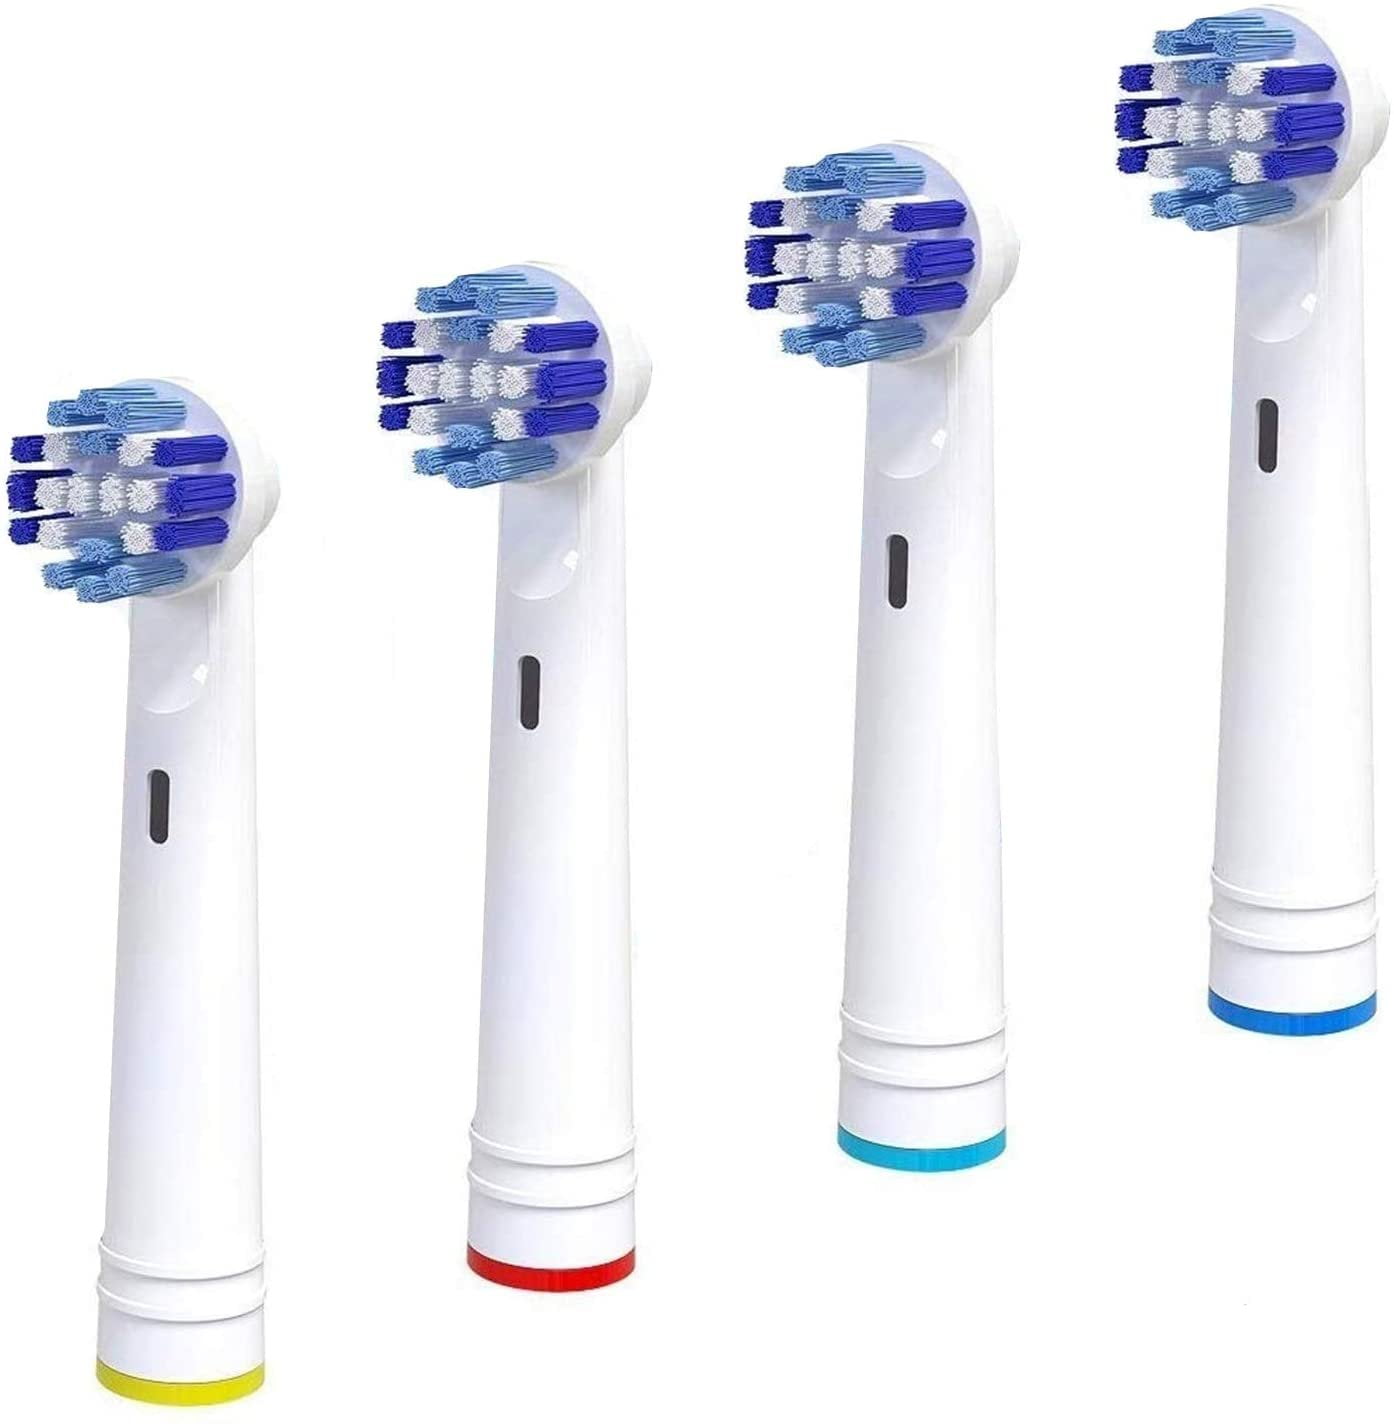 Replacement Brush Heads Compatible Oral B Braun- Pack of 4 Professional Electric Toothbrush Heads- Precise Refills for Oral-b 7000, Clean, Pro 1000, 9600, 500, 3000, 8000, Vitality Plus! - Walmart.com